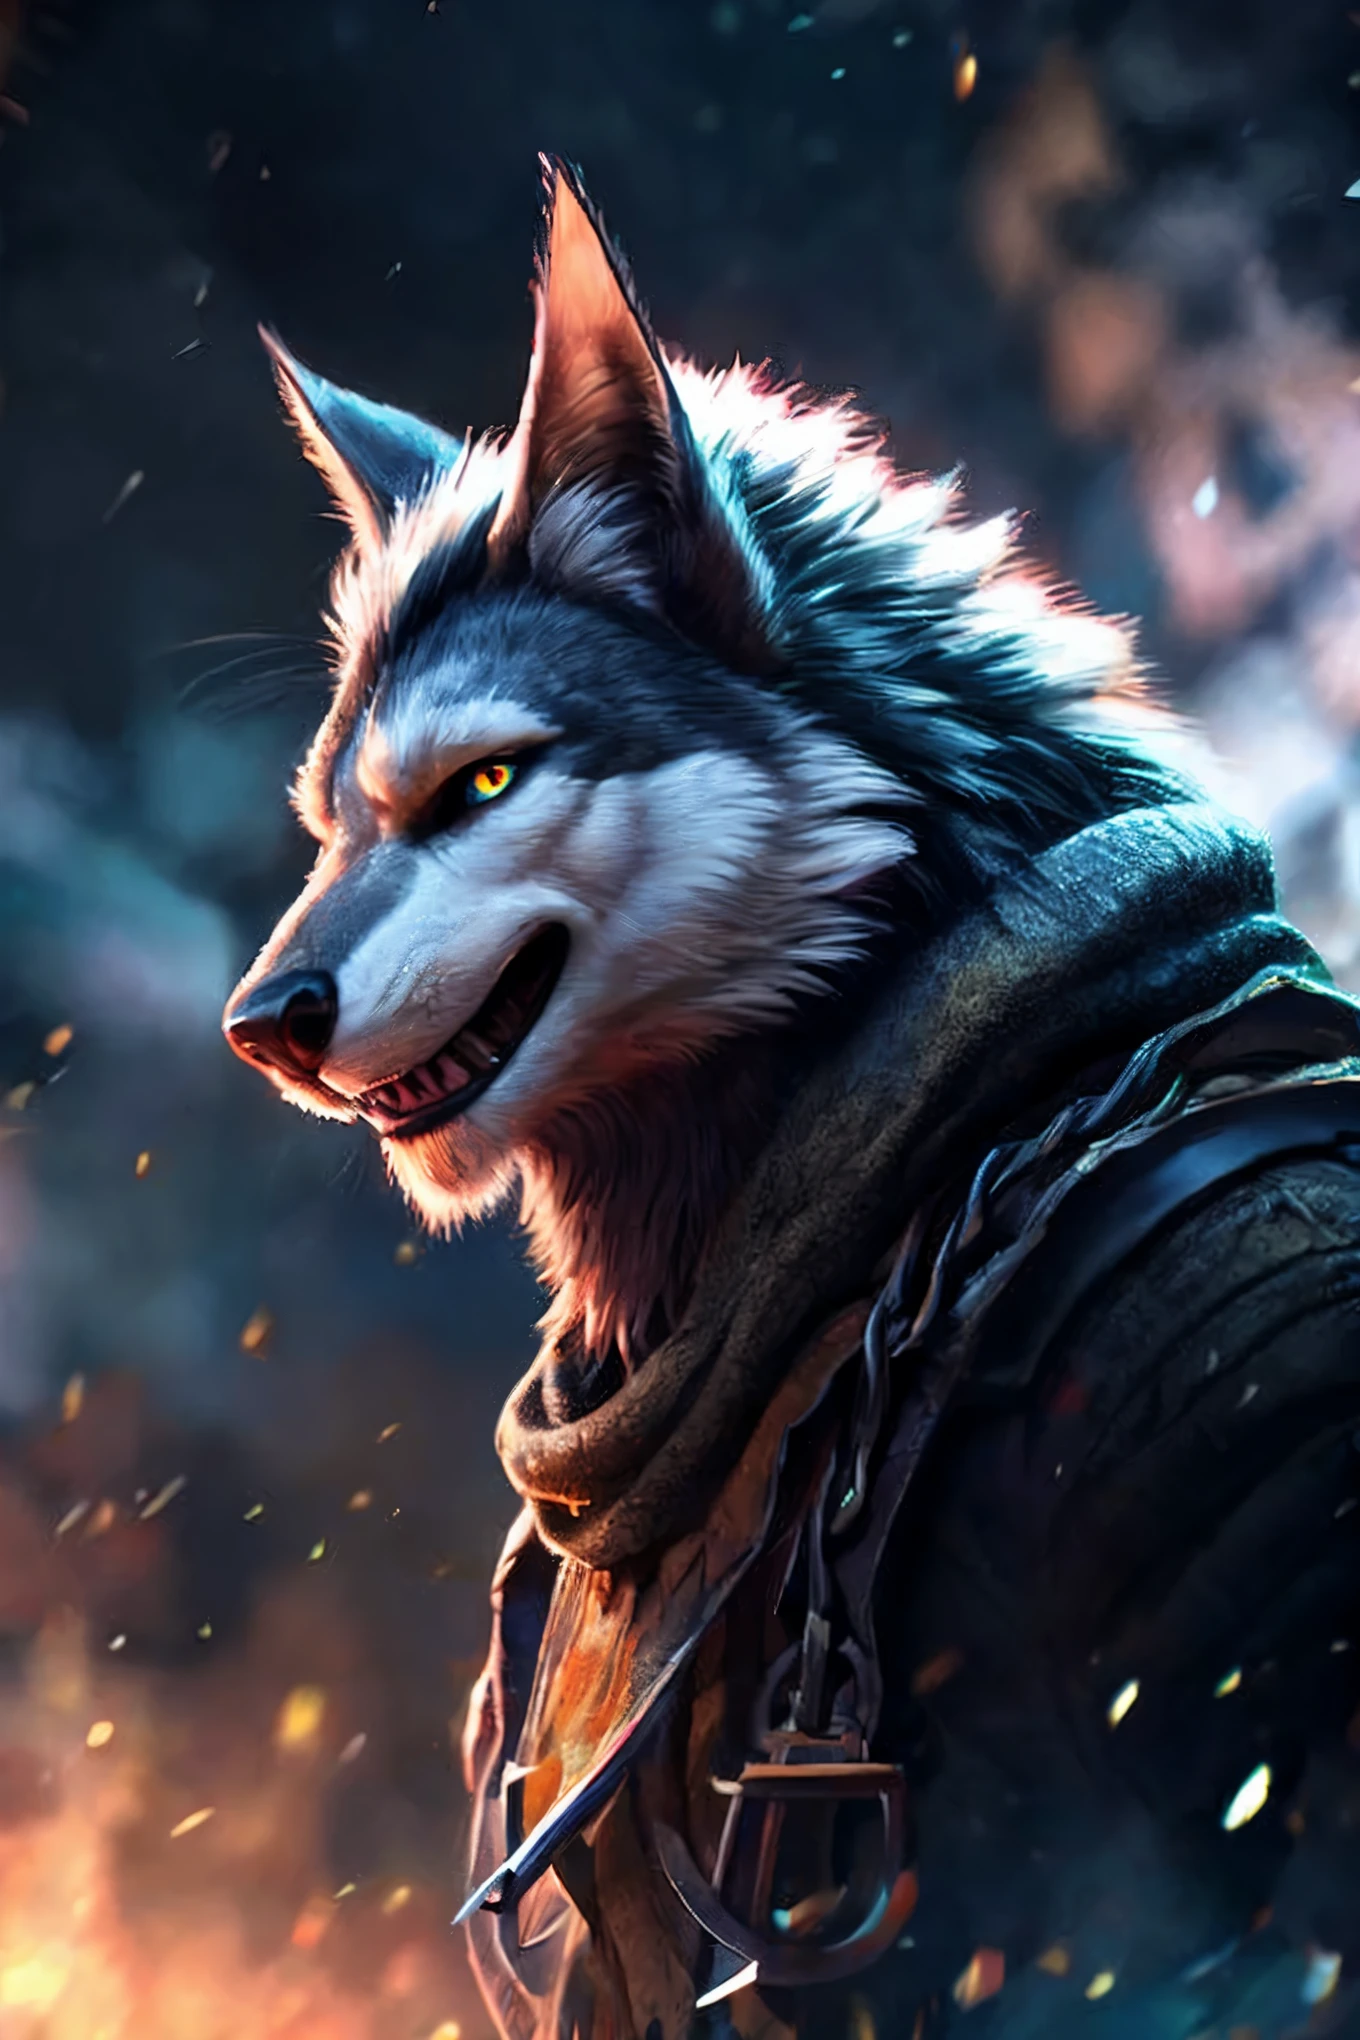 a wolf with a leather jacket and a chain around his neck, anthro wolf face, furry wolf, dramatic and detailed cinematic fur, an anthropomorphic wolf, anthropomorphic wolf, fantasy wolf portrait, wolf armor, an anthro wolf, big Wolf, Gloomy - Wolf, epic art style, High quality 8K detailed art, furry character portrait